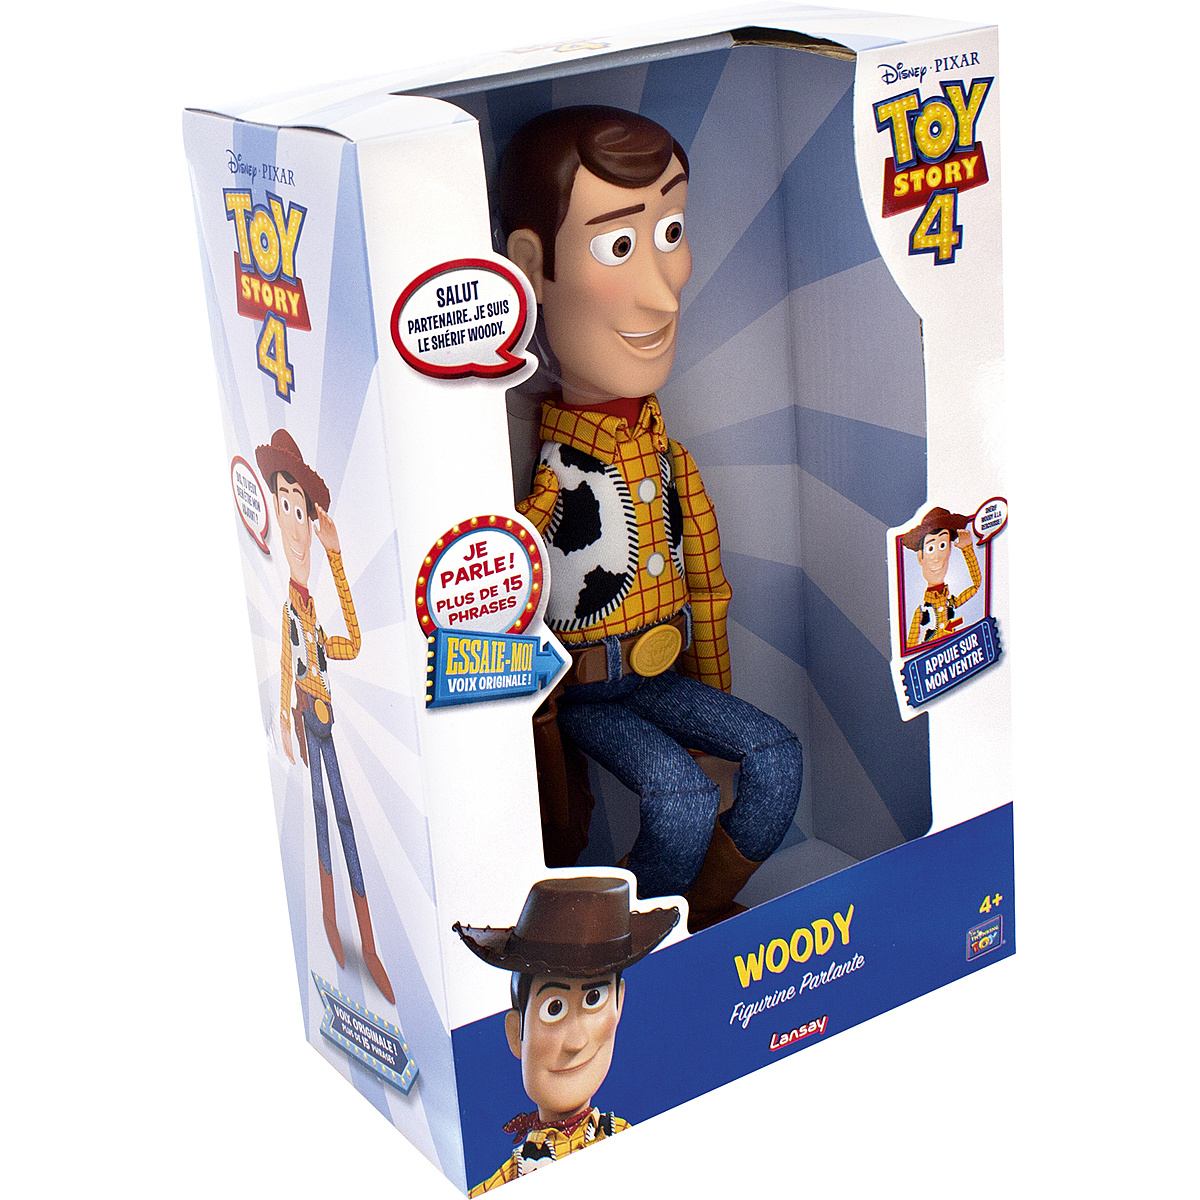 Toy Story 4 - Woody Personnage Parlant